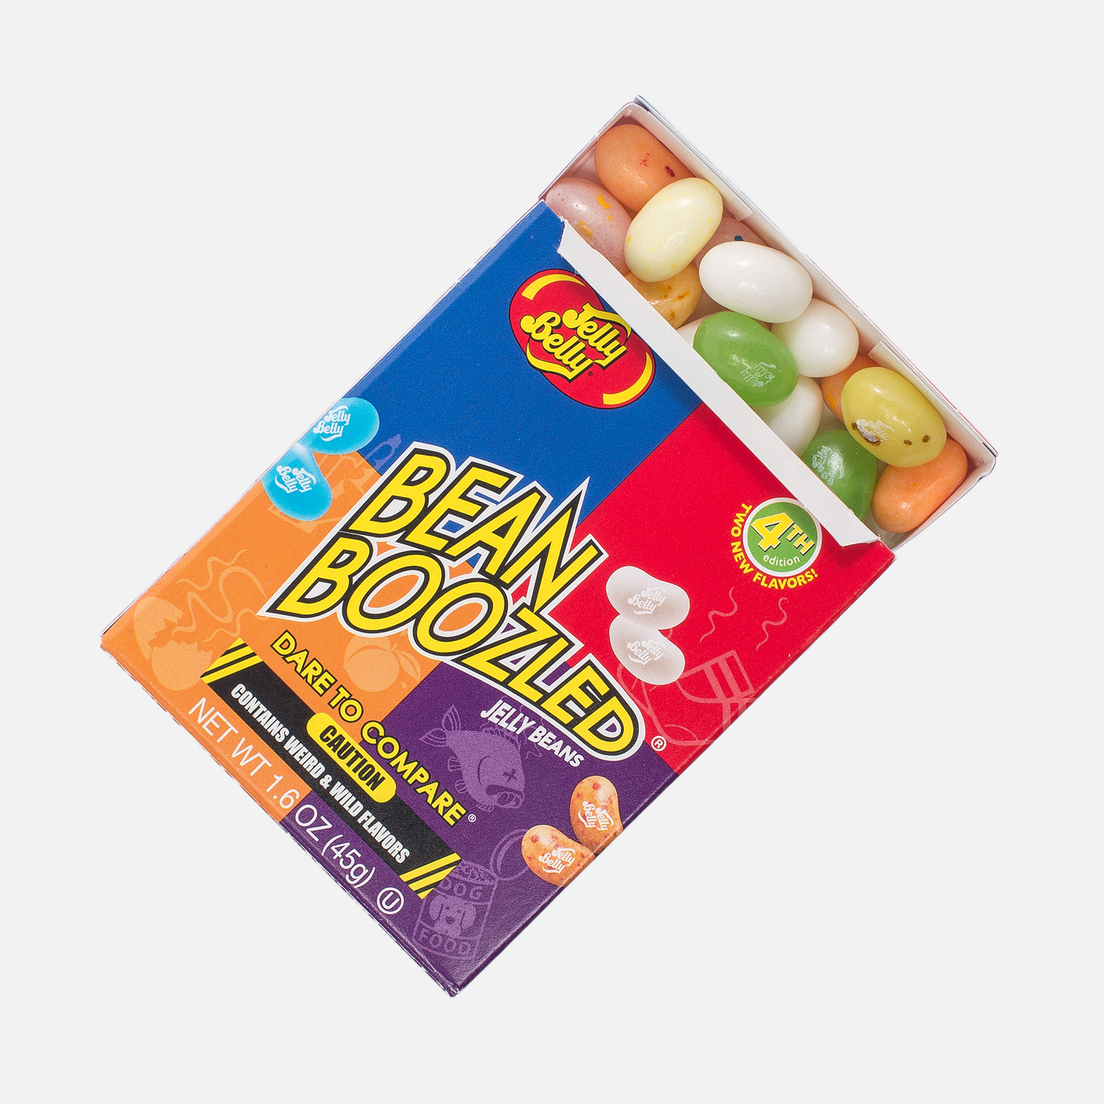 Jelly Belly Драже Bean Boozled 3RD Edition 45g